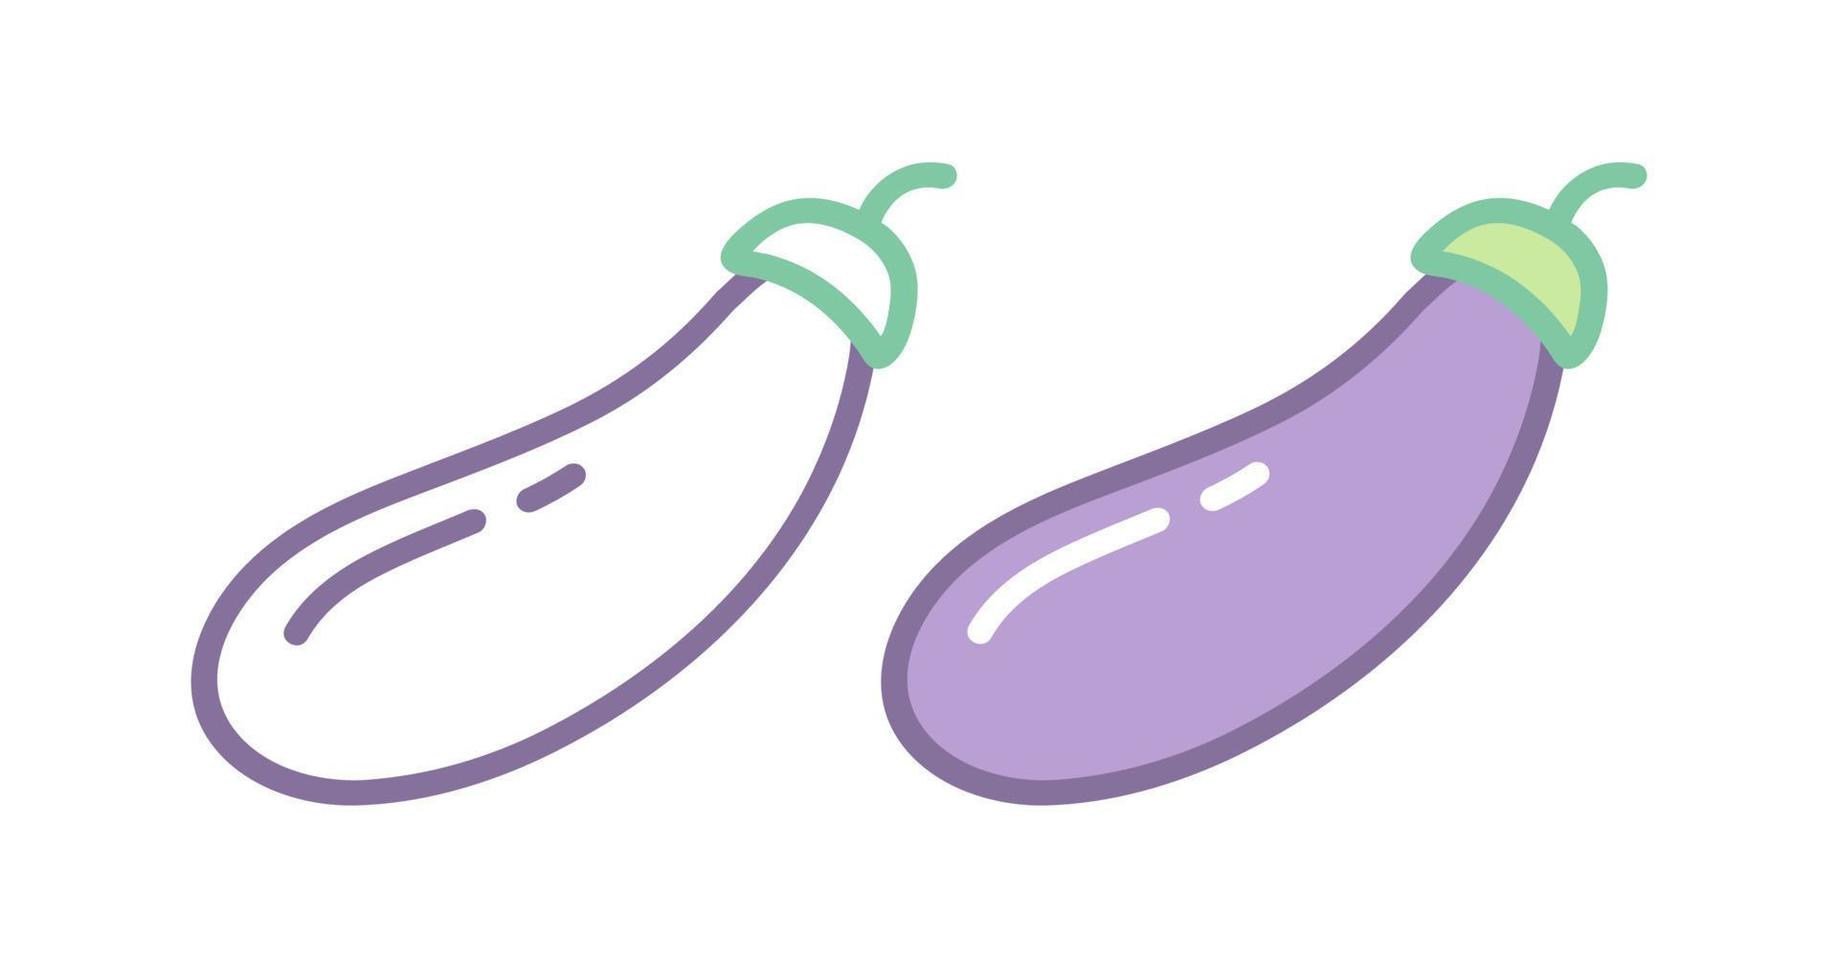 Vector set icons of eggplants. Illustration of eggplant. Hand drawing vegetables.